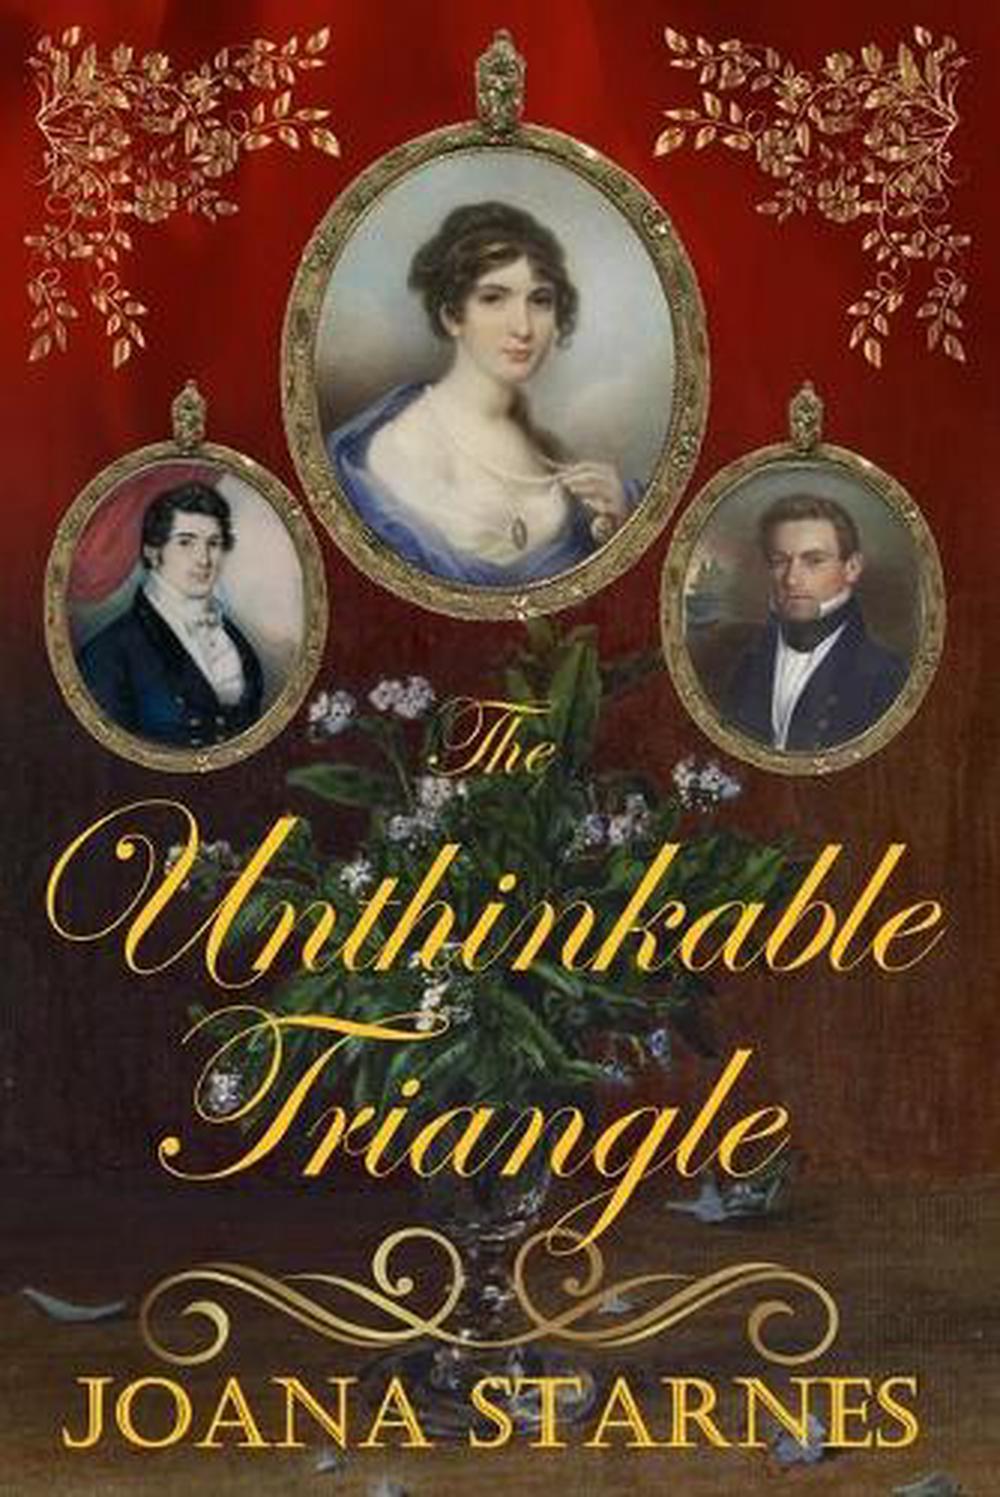 The Unthinkable Triangle by Joana Starnes